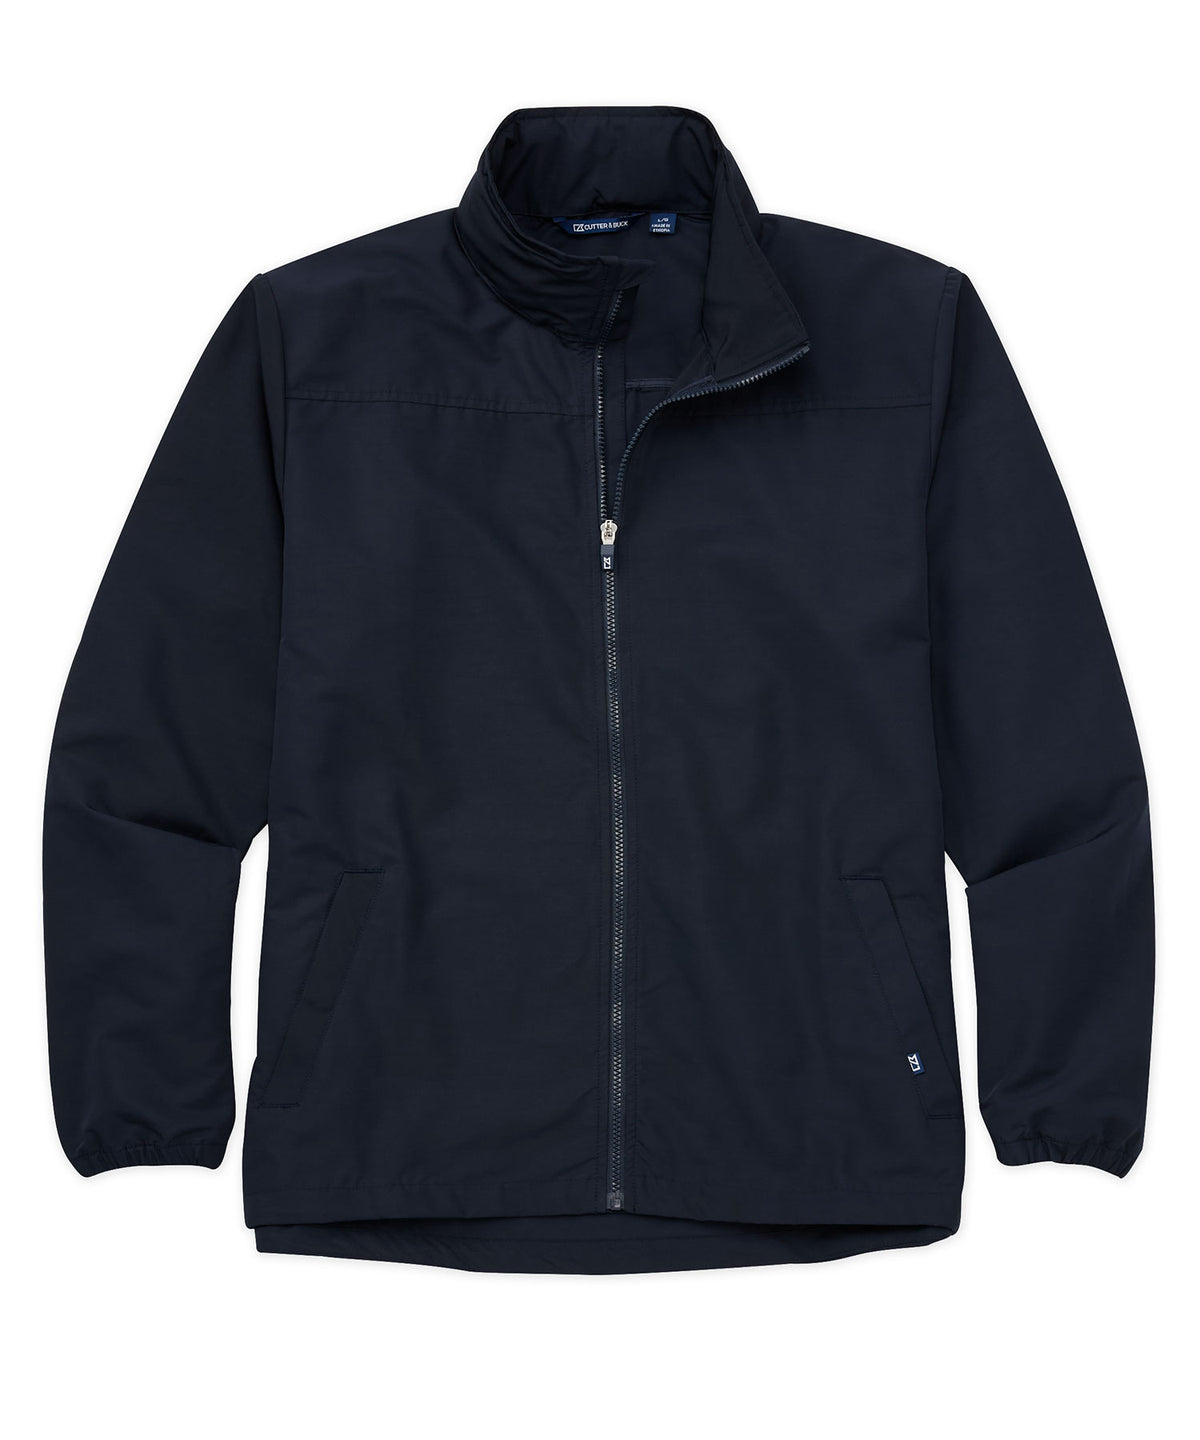 Cutter & Buck Charter Eco Knit Recycled Full-Zip Jacket, Big & Tall